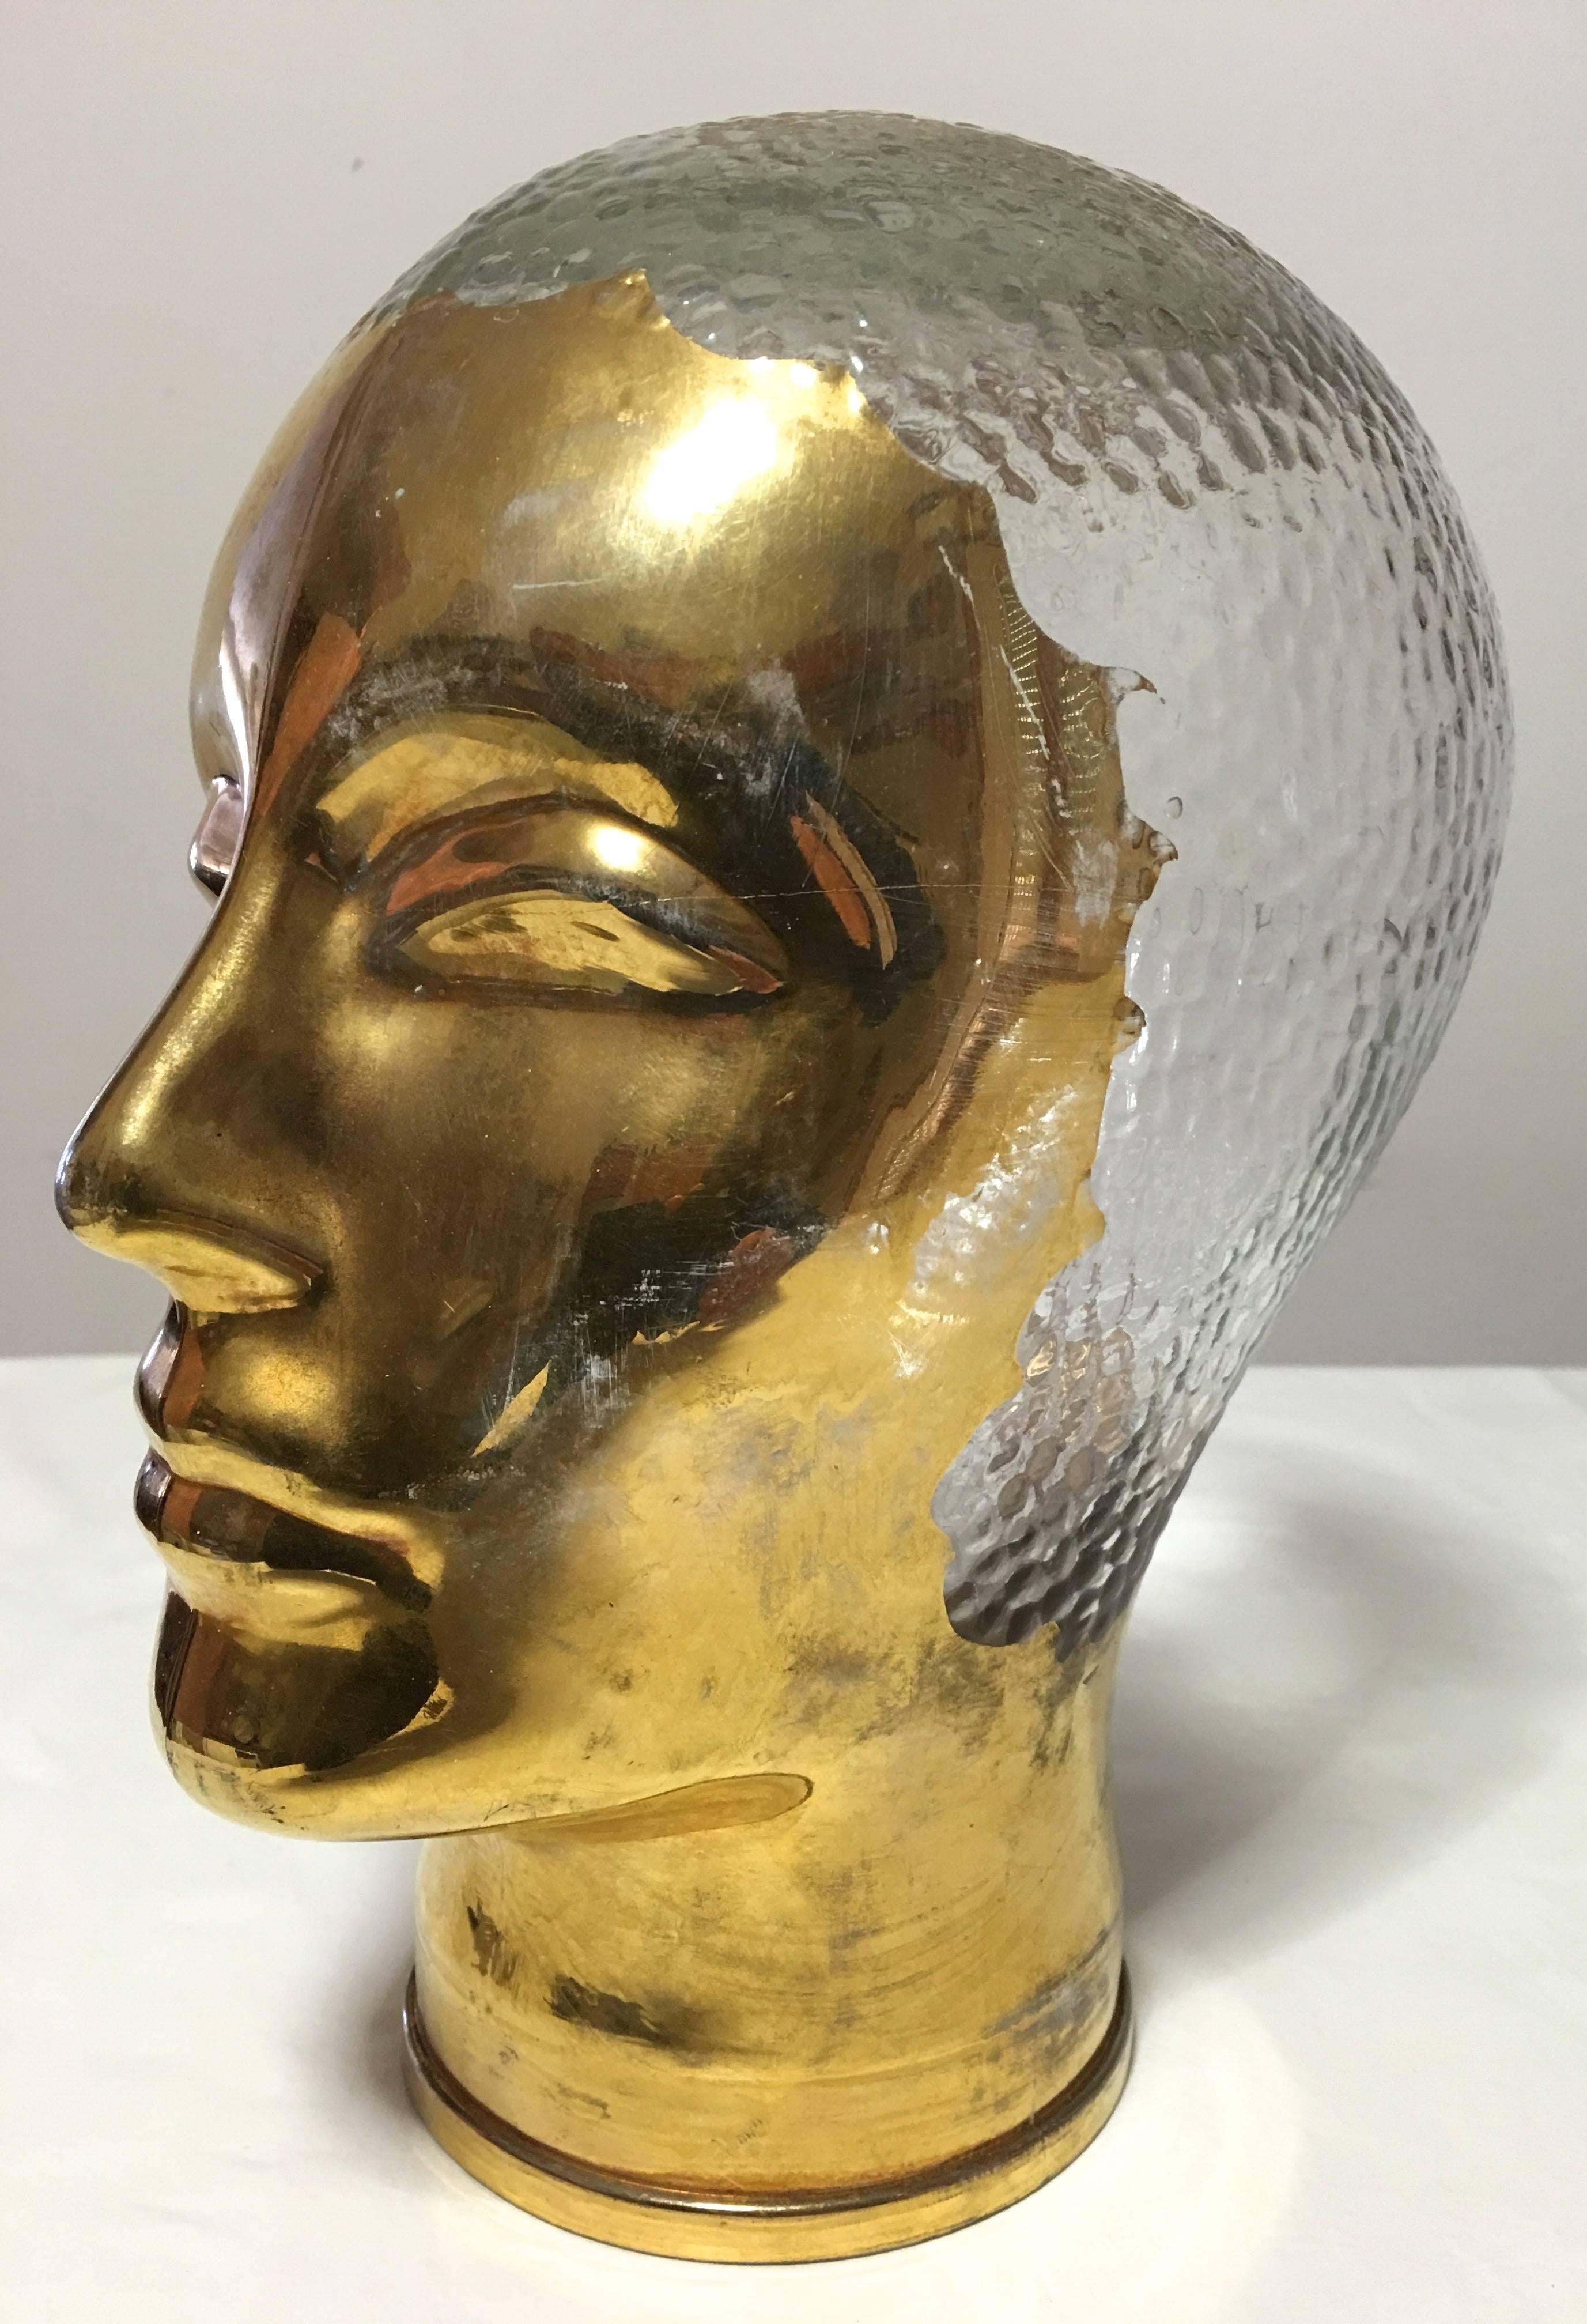 A very rare sculpture of glass textured head covered with gold executed by Piero Fornasetti in the 1970s, Italy. Original label at the back of the neck. Only 10 of these were made.